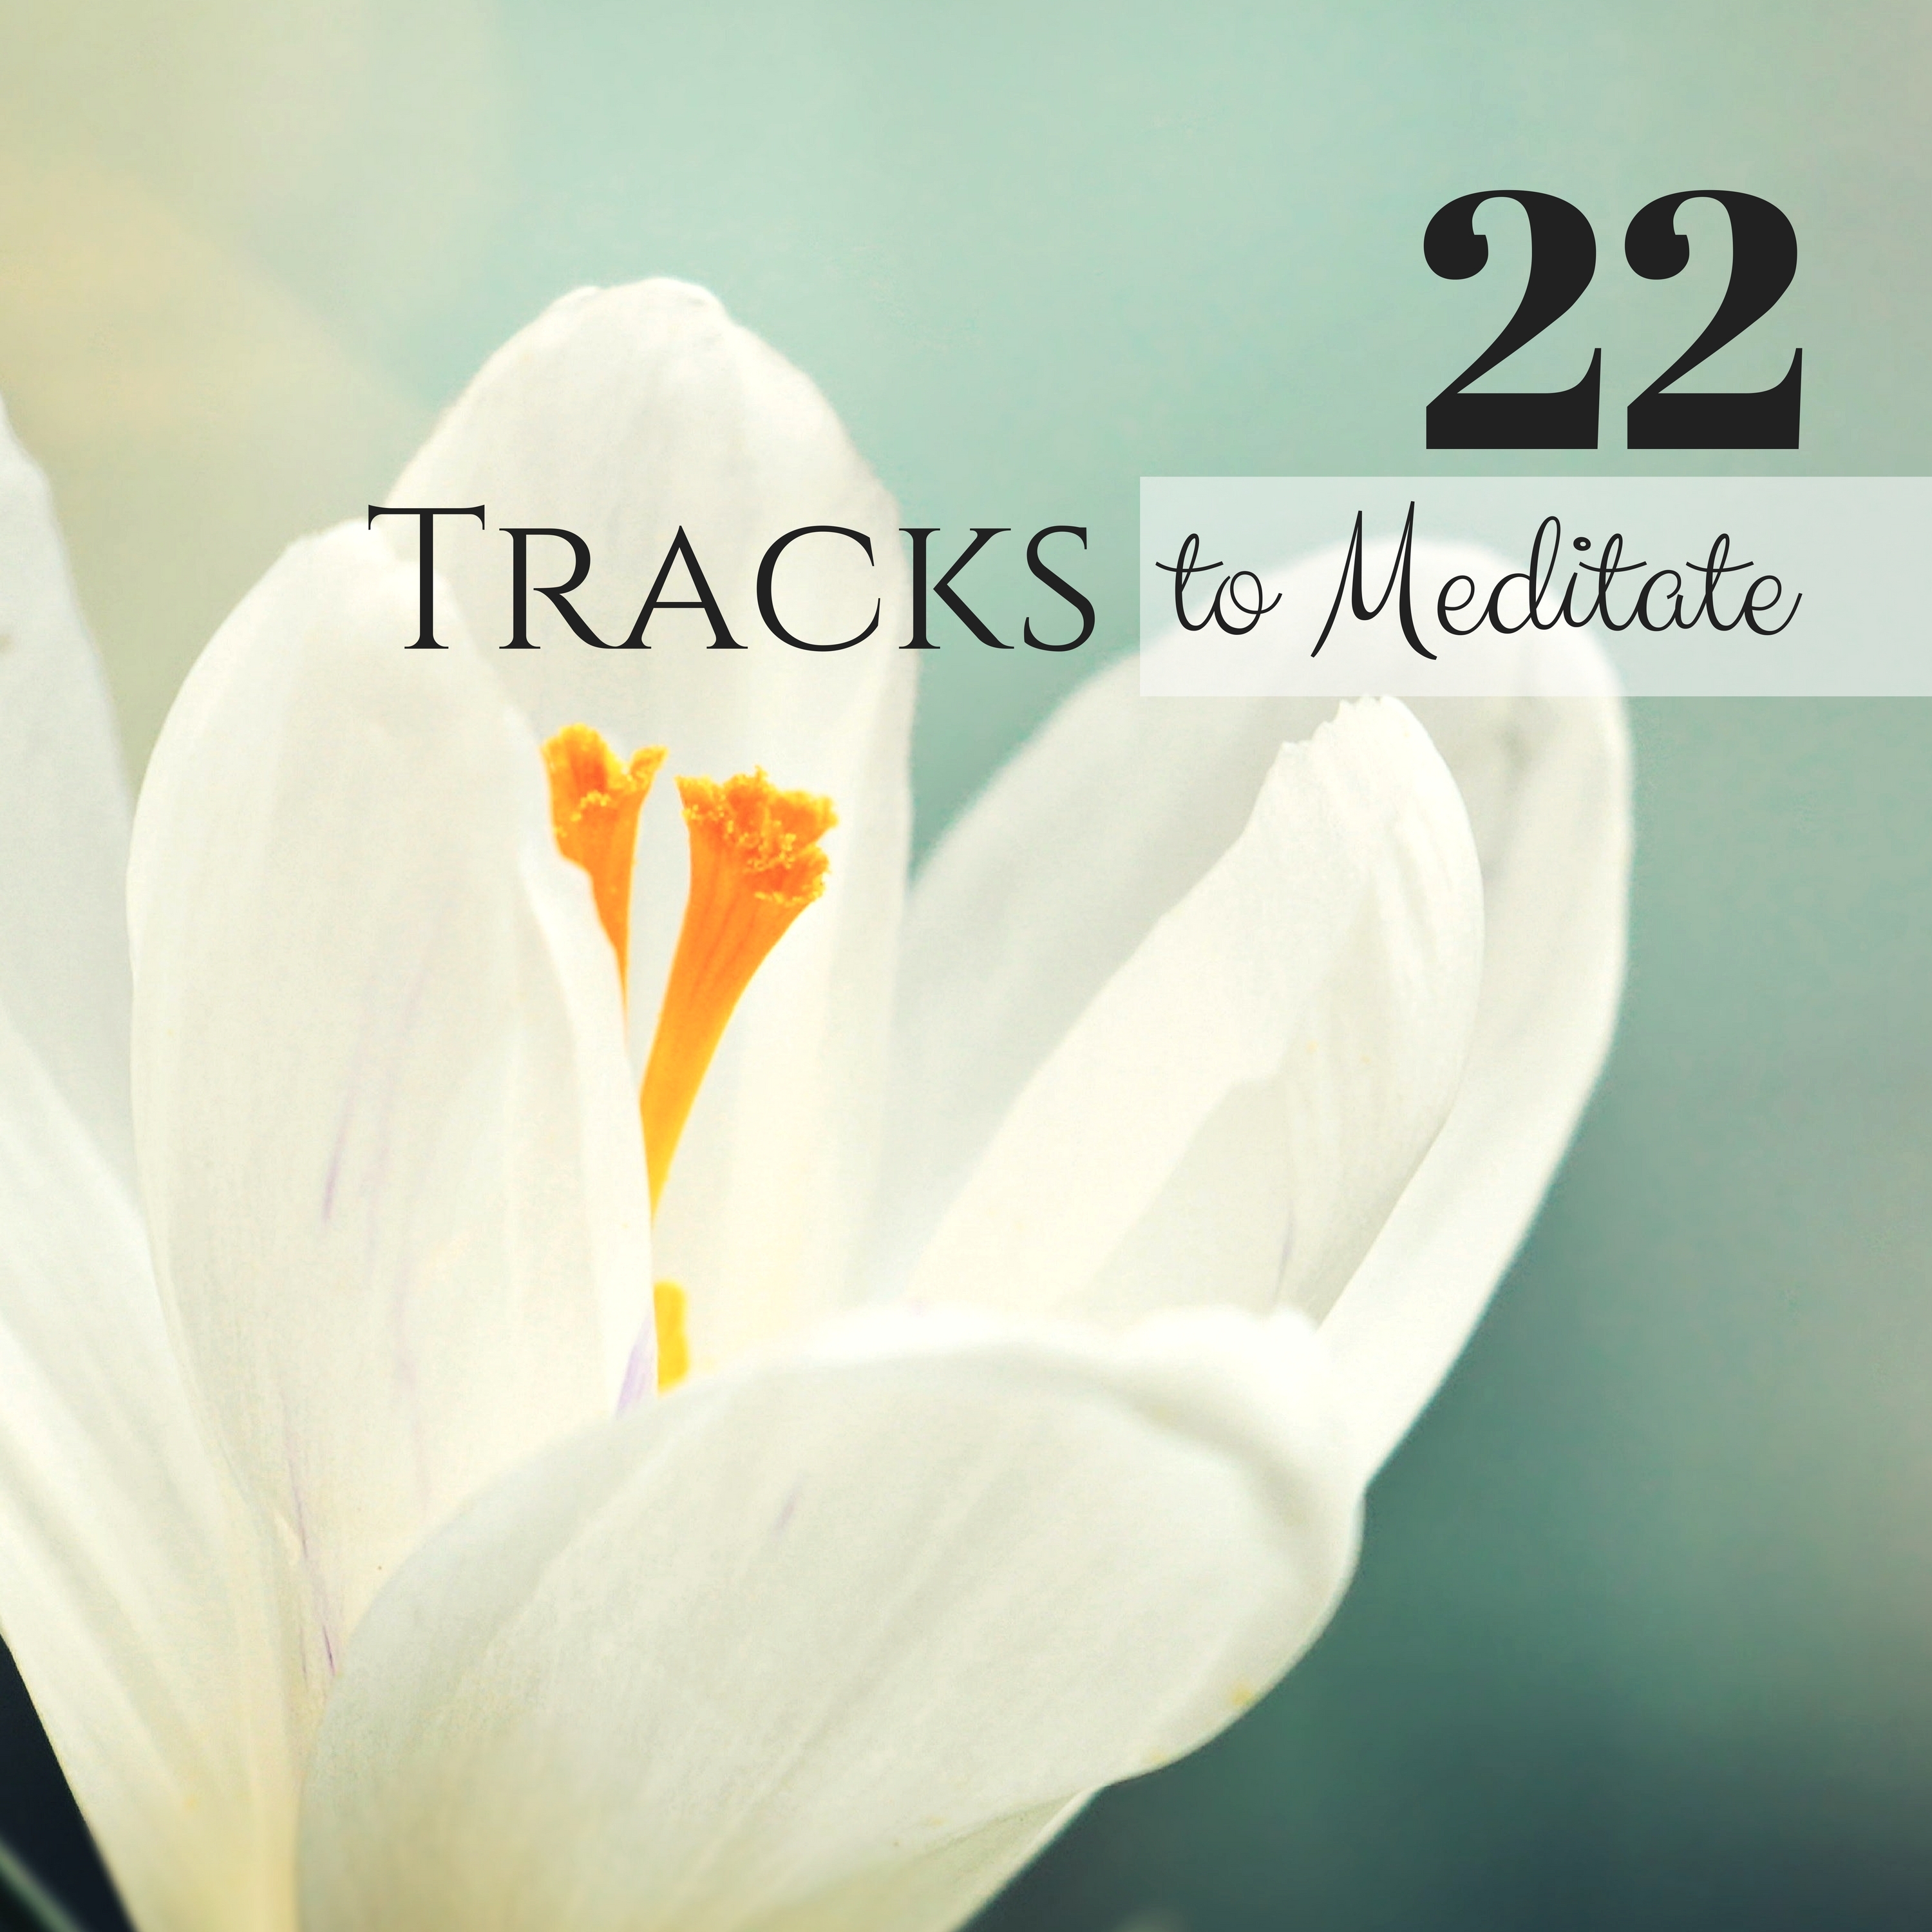 22 Tracks to Meditate - Spiritual New Age Music for Buddhist Practice